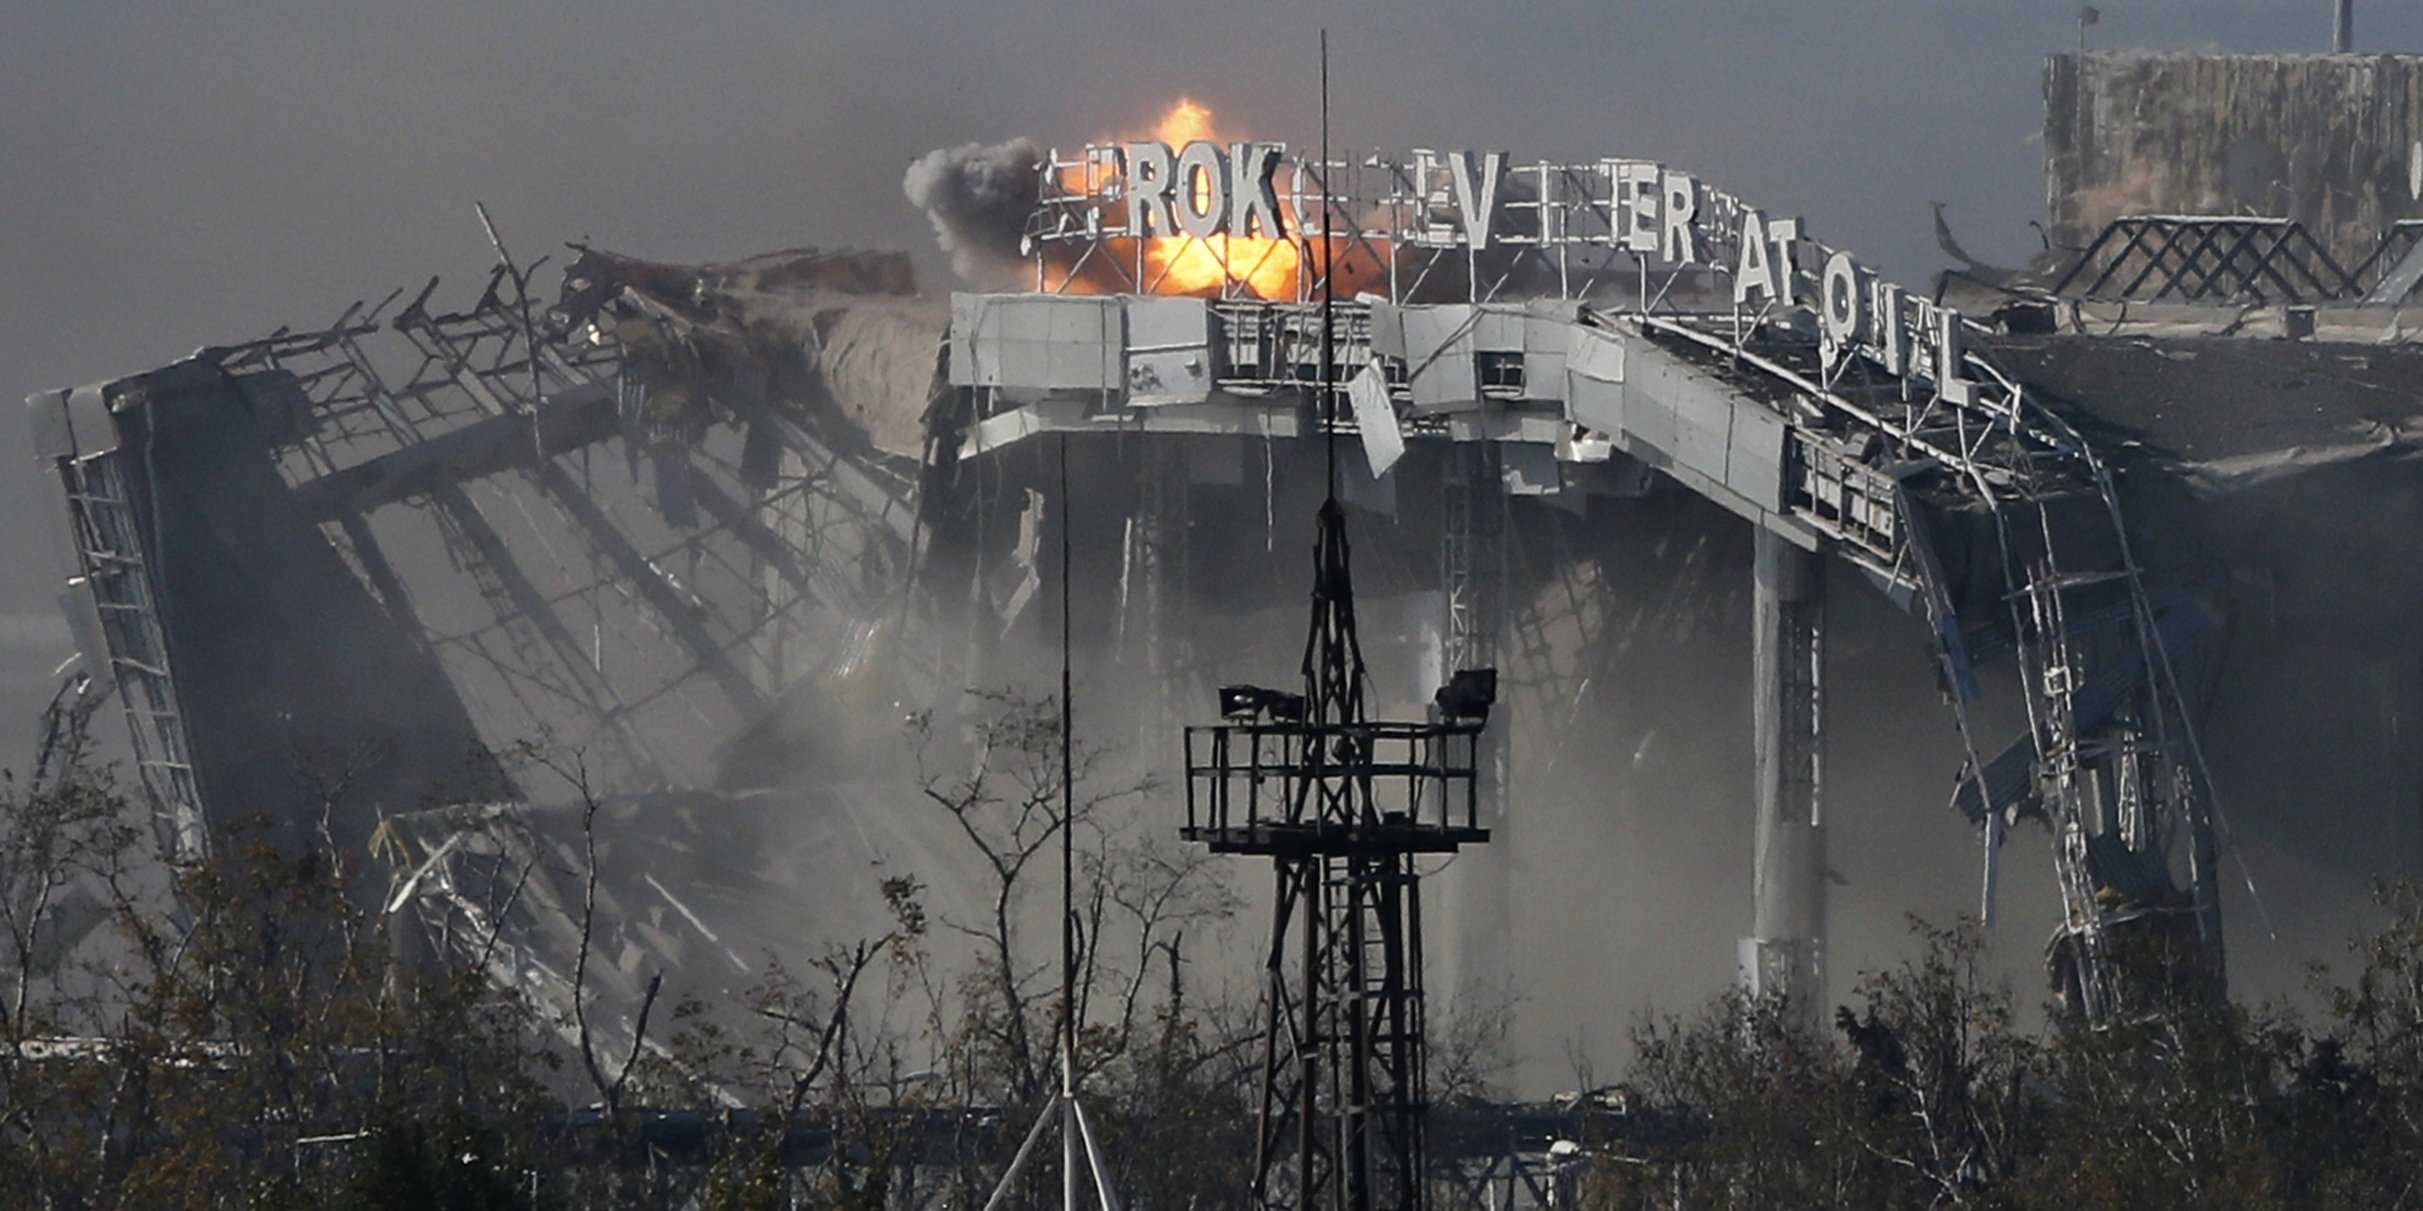 Donetsk Airport completely destroyed during Russian aggression in the Ukrainian Donbas.